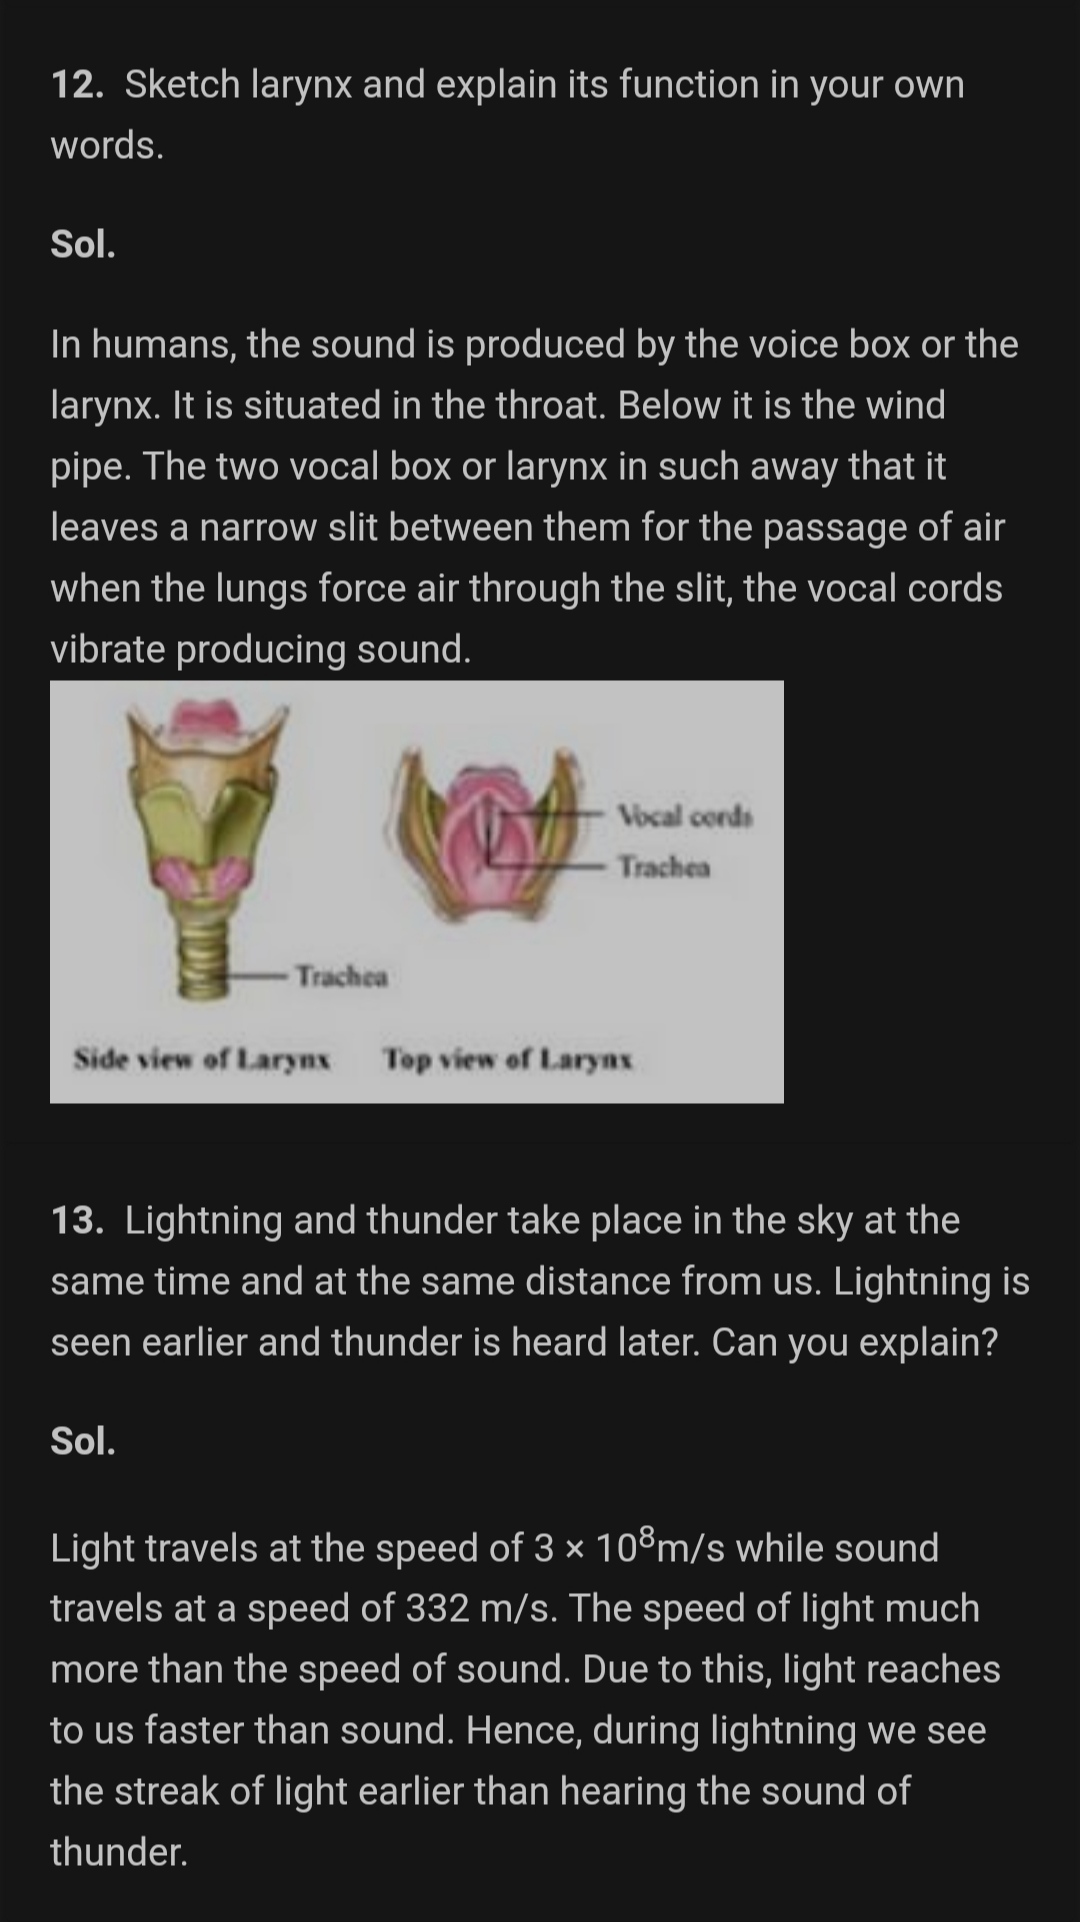 Sketch larynx and explain its function in your own words  Brainlyin